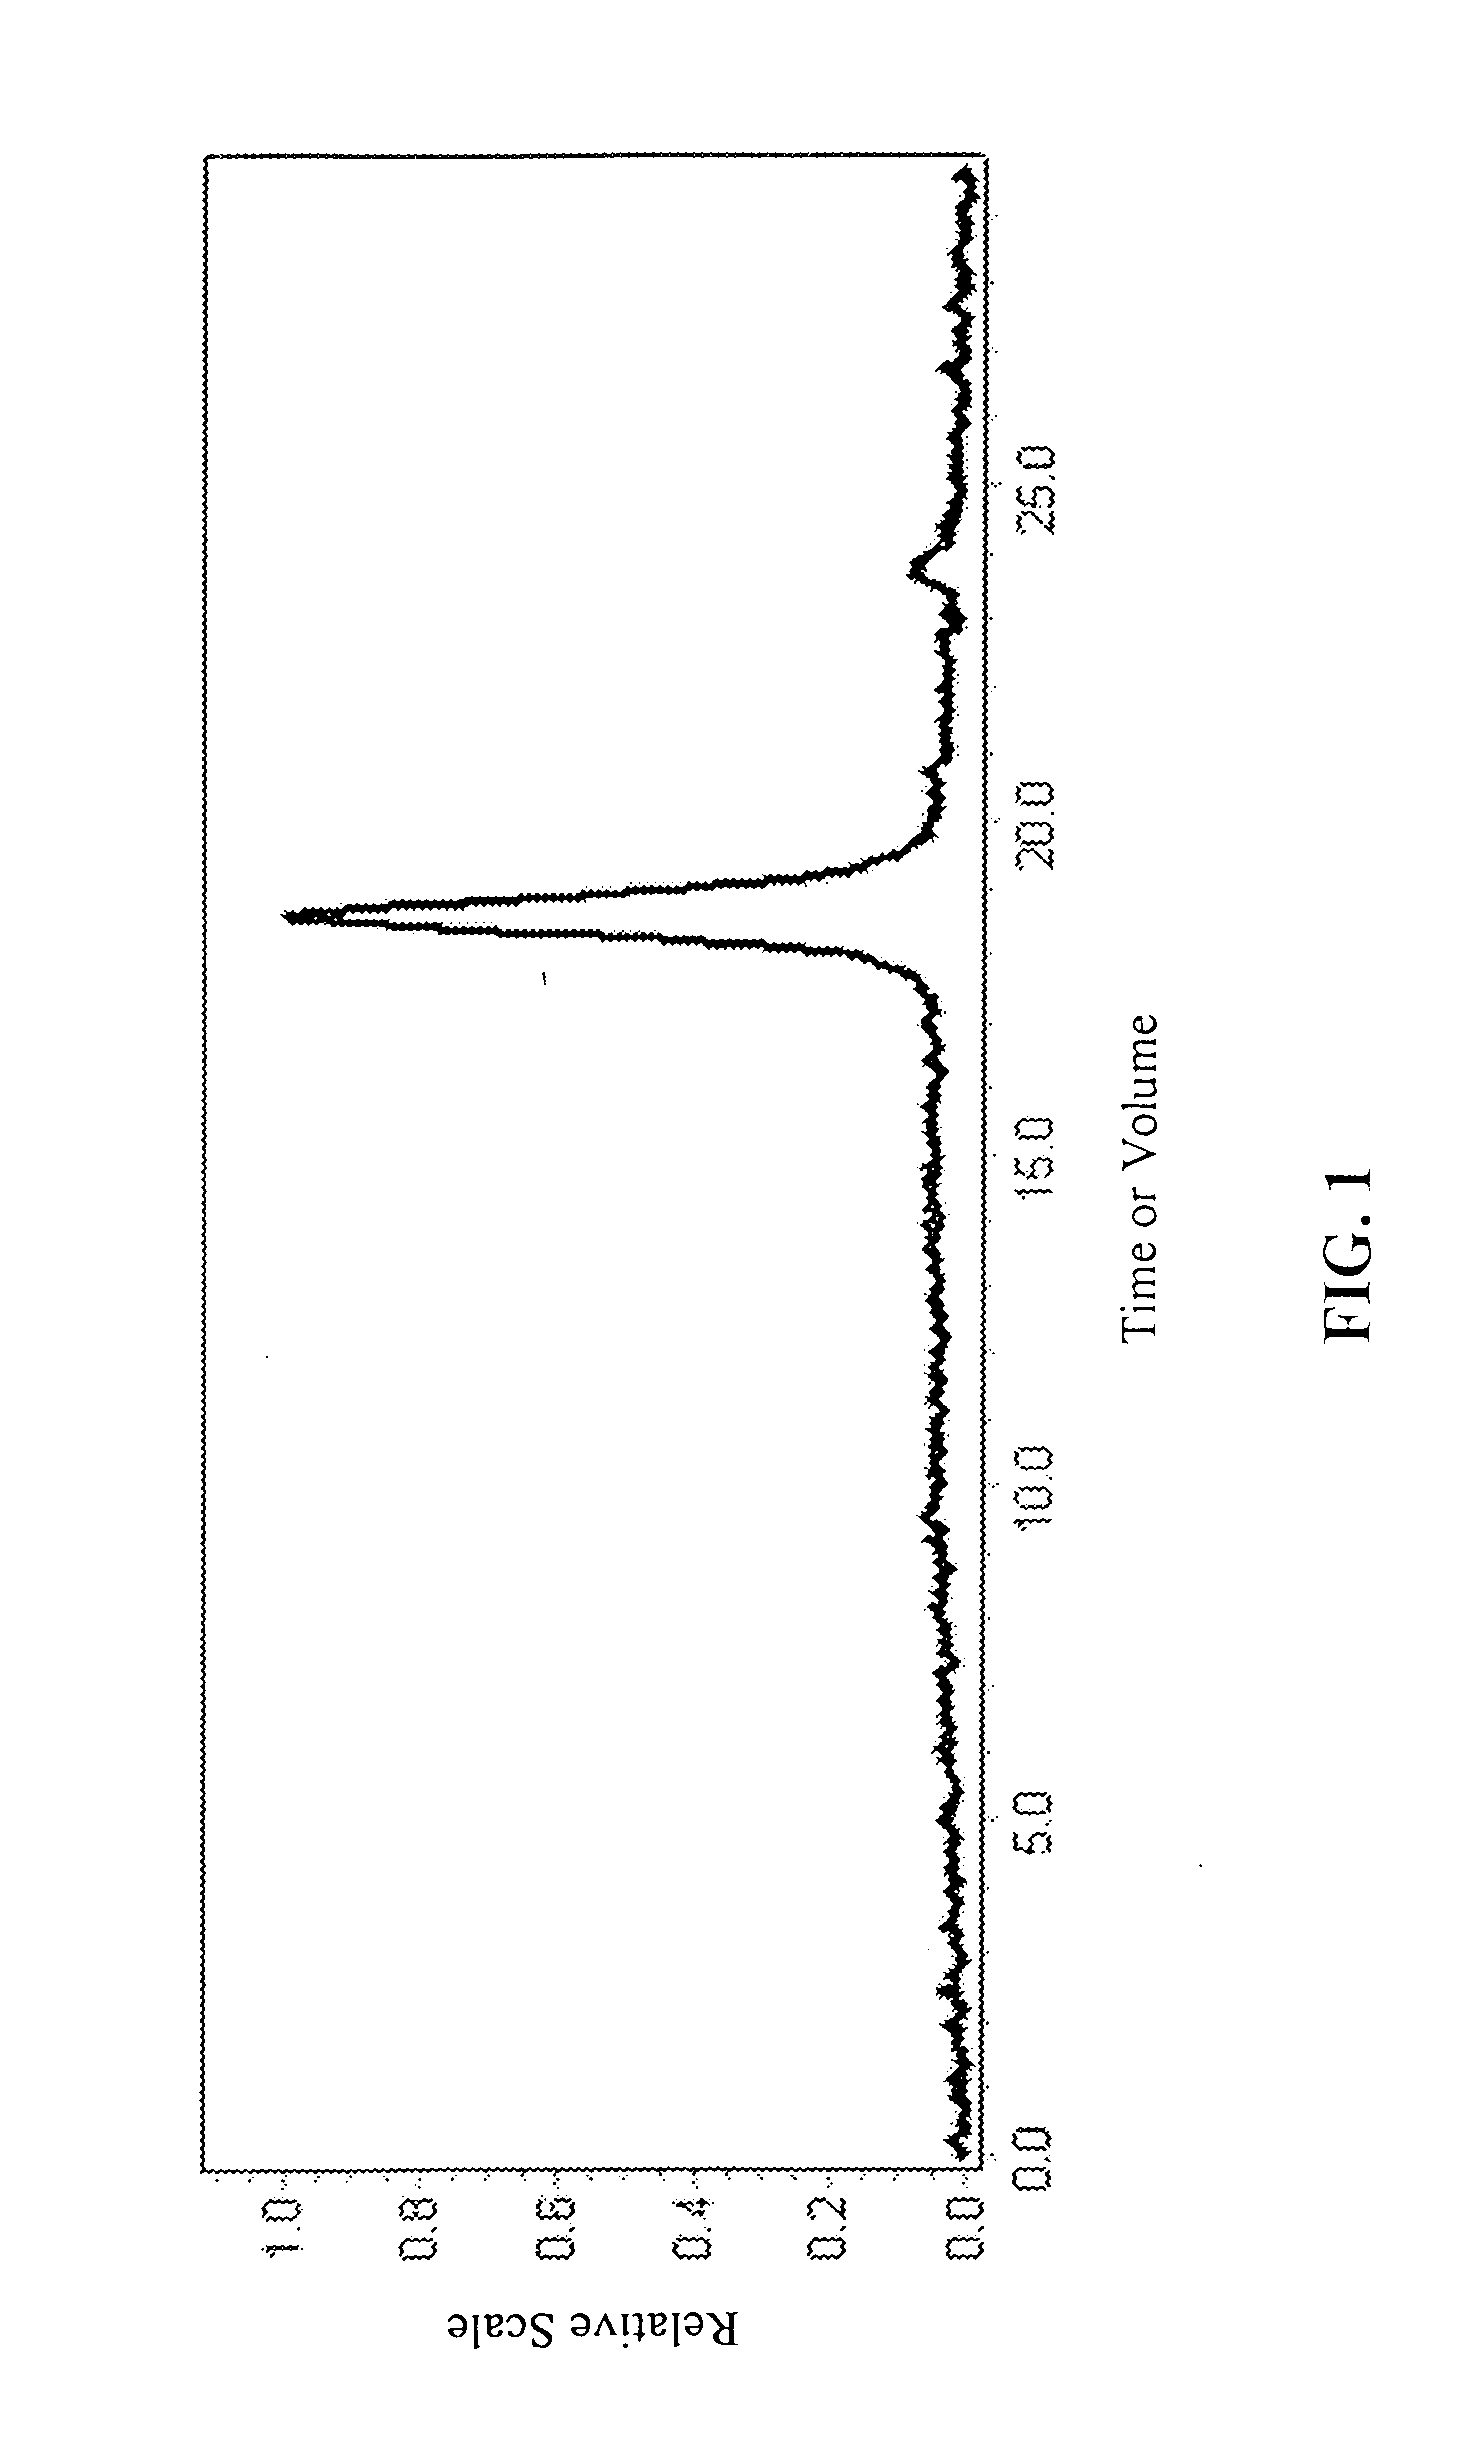 Poly-beta-peptides from functionalized beta-lactam monomers and antibacterial compositions containing same